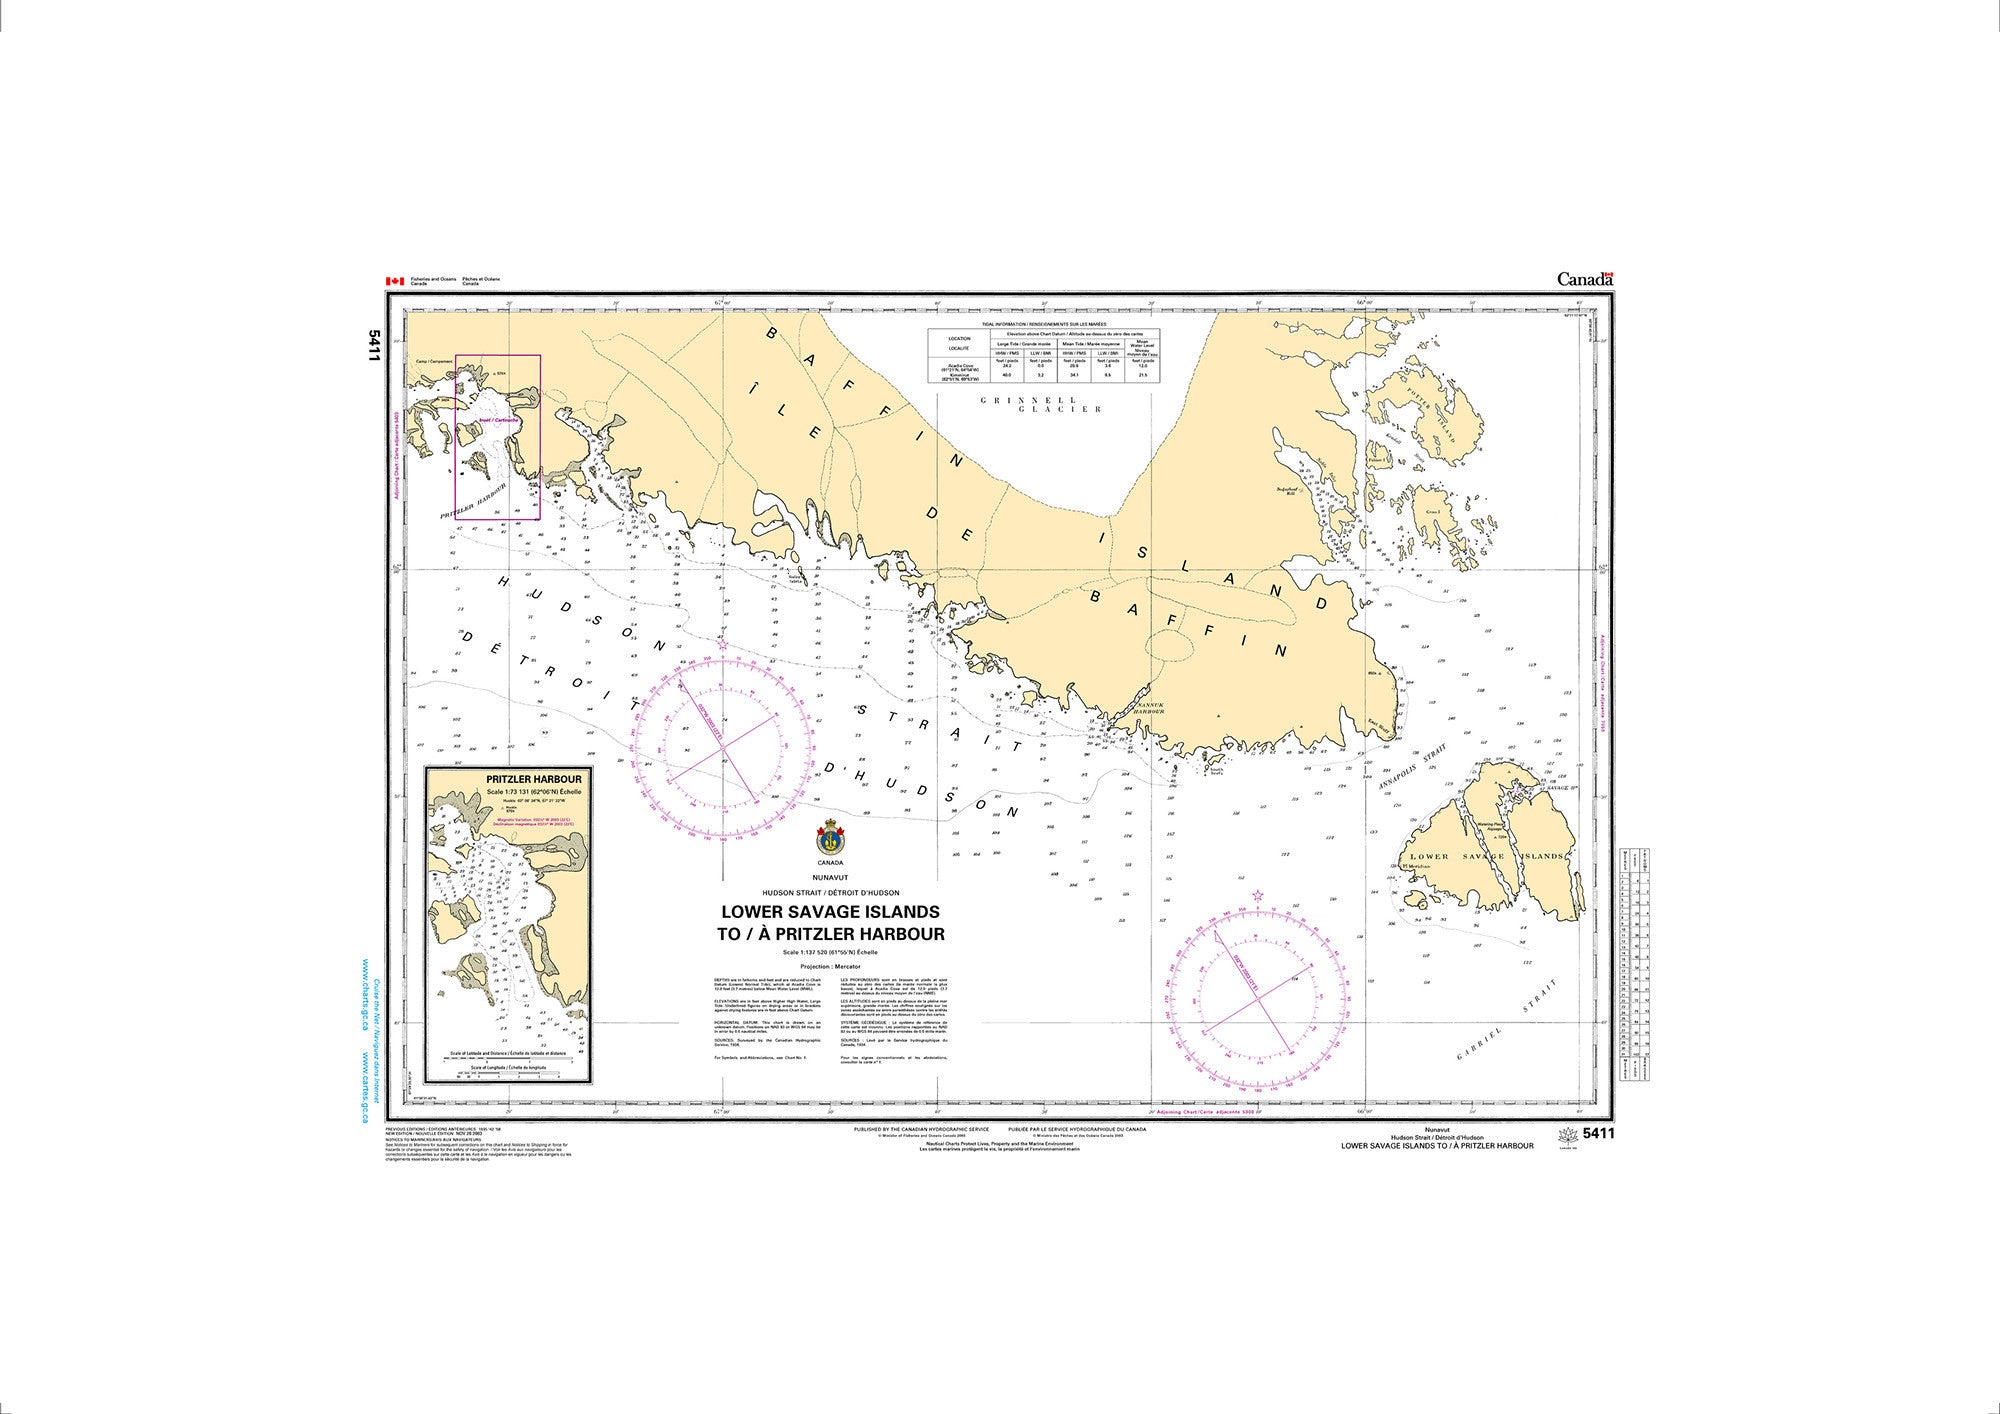 Canadian Hydrographic Service Nautical Chart CHS5411: Lower Savage Islands to/à Pritzler Harbour